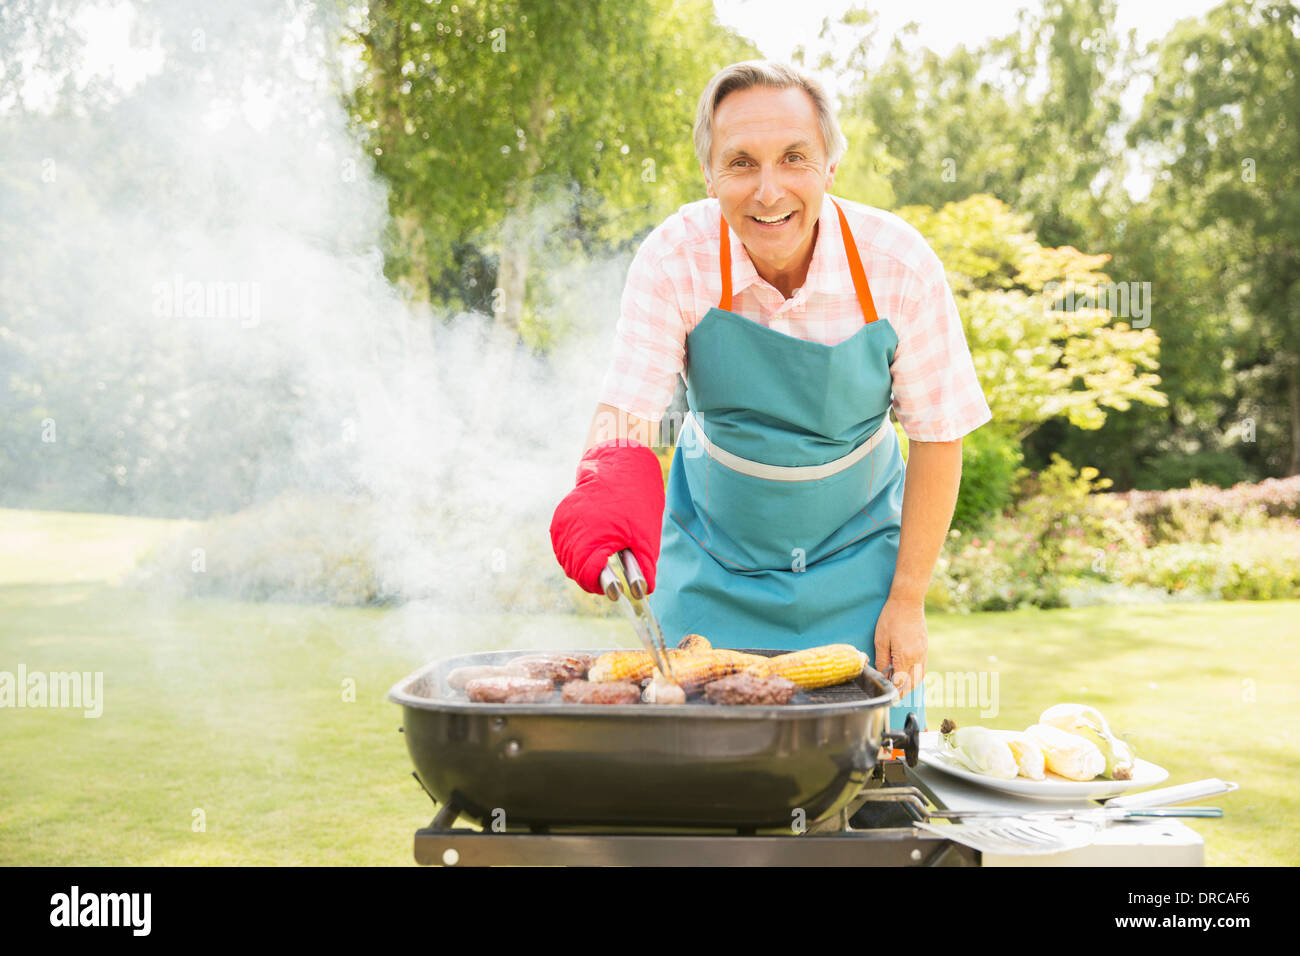 Man grilling food on barbecue in backyard Stock Photo